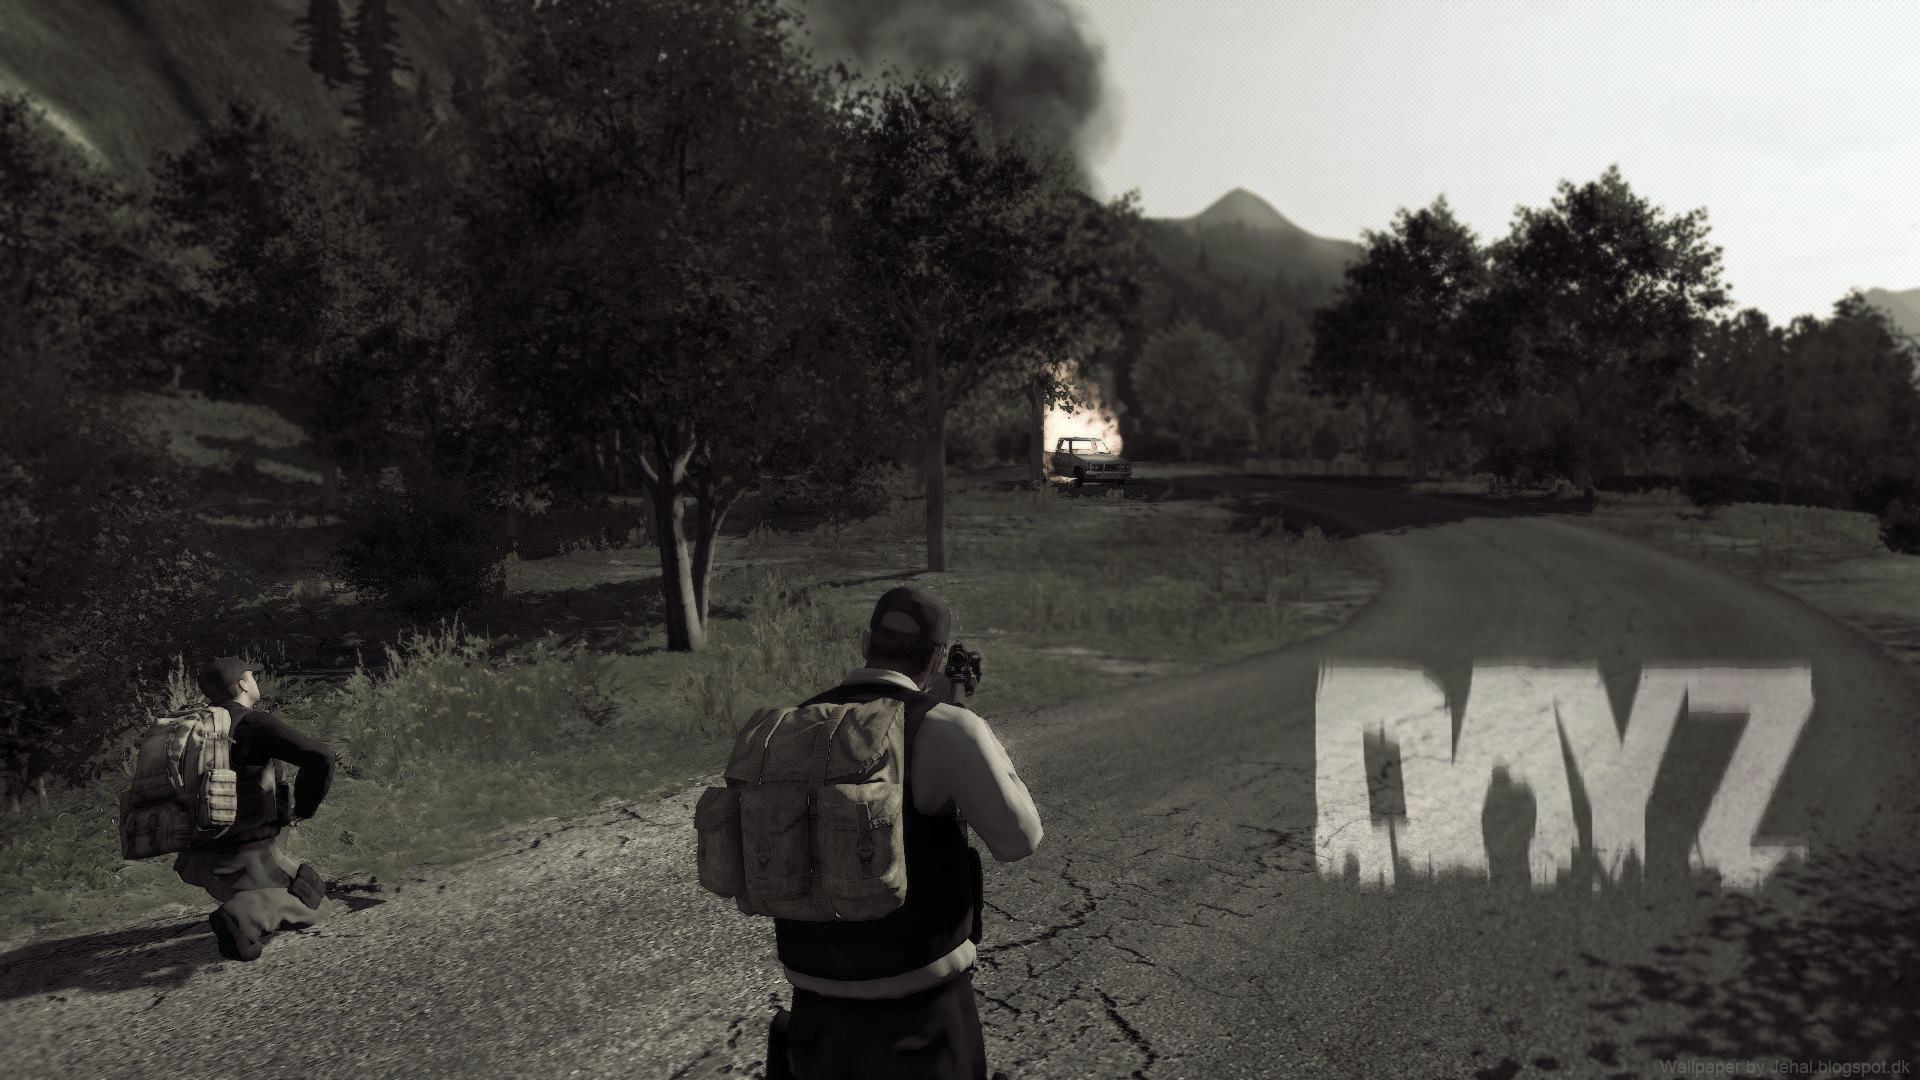 Dayz HD Wallpaper And Background Image